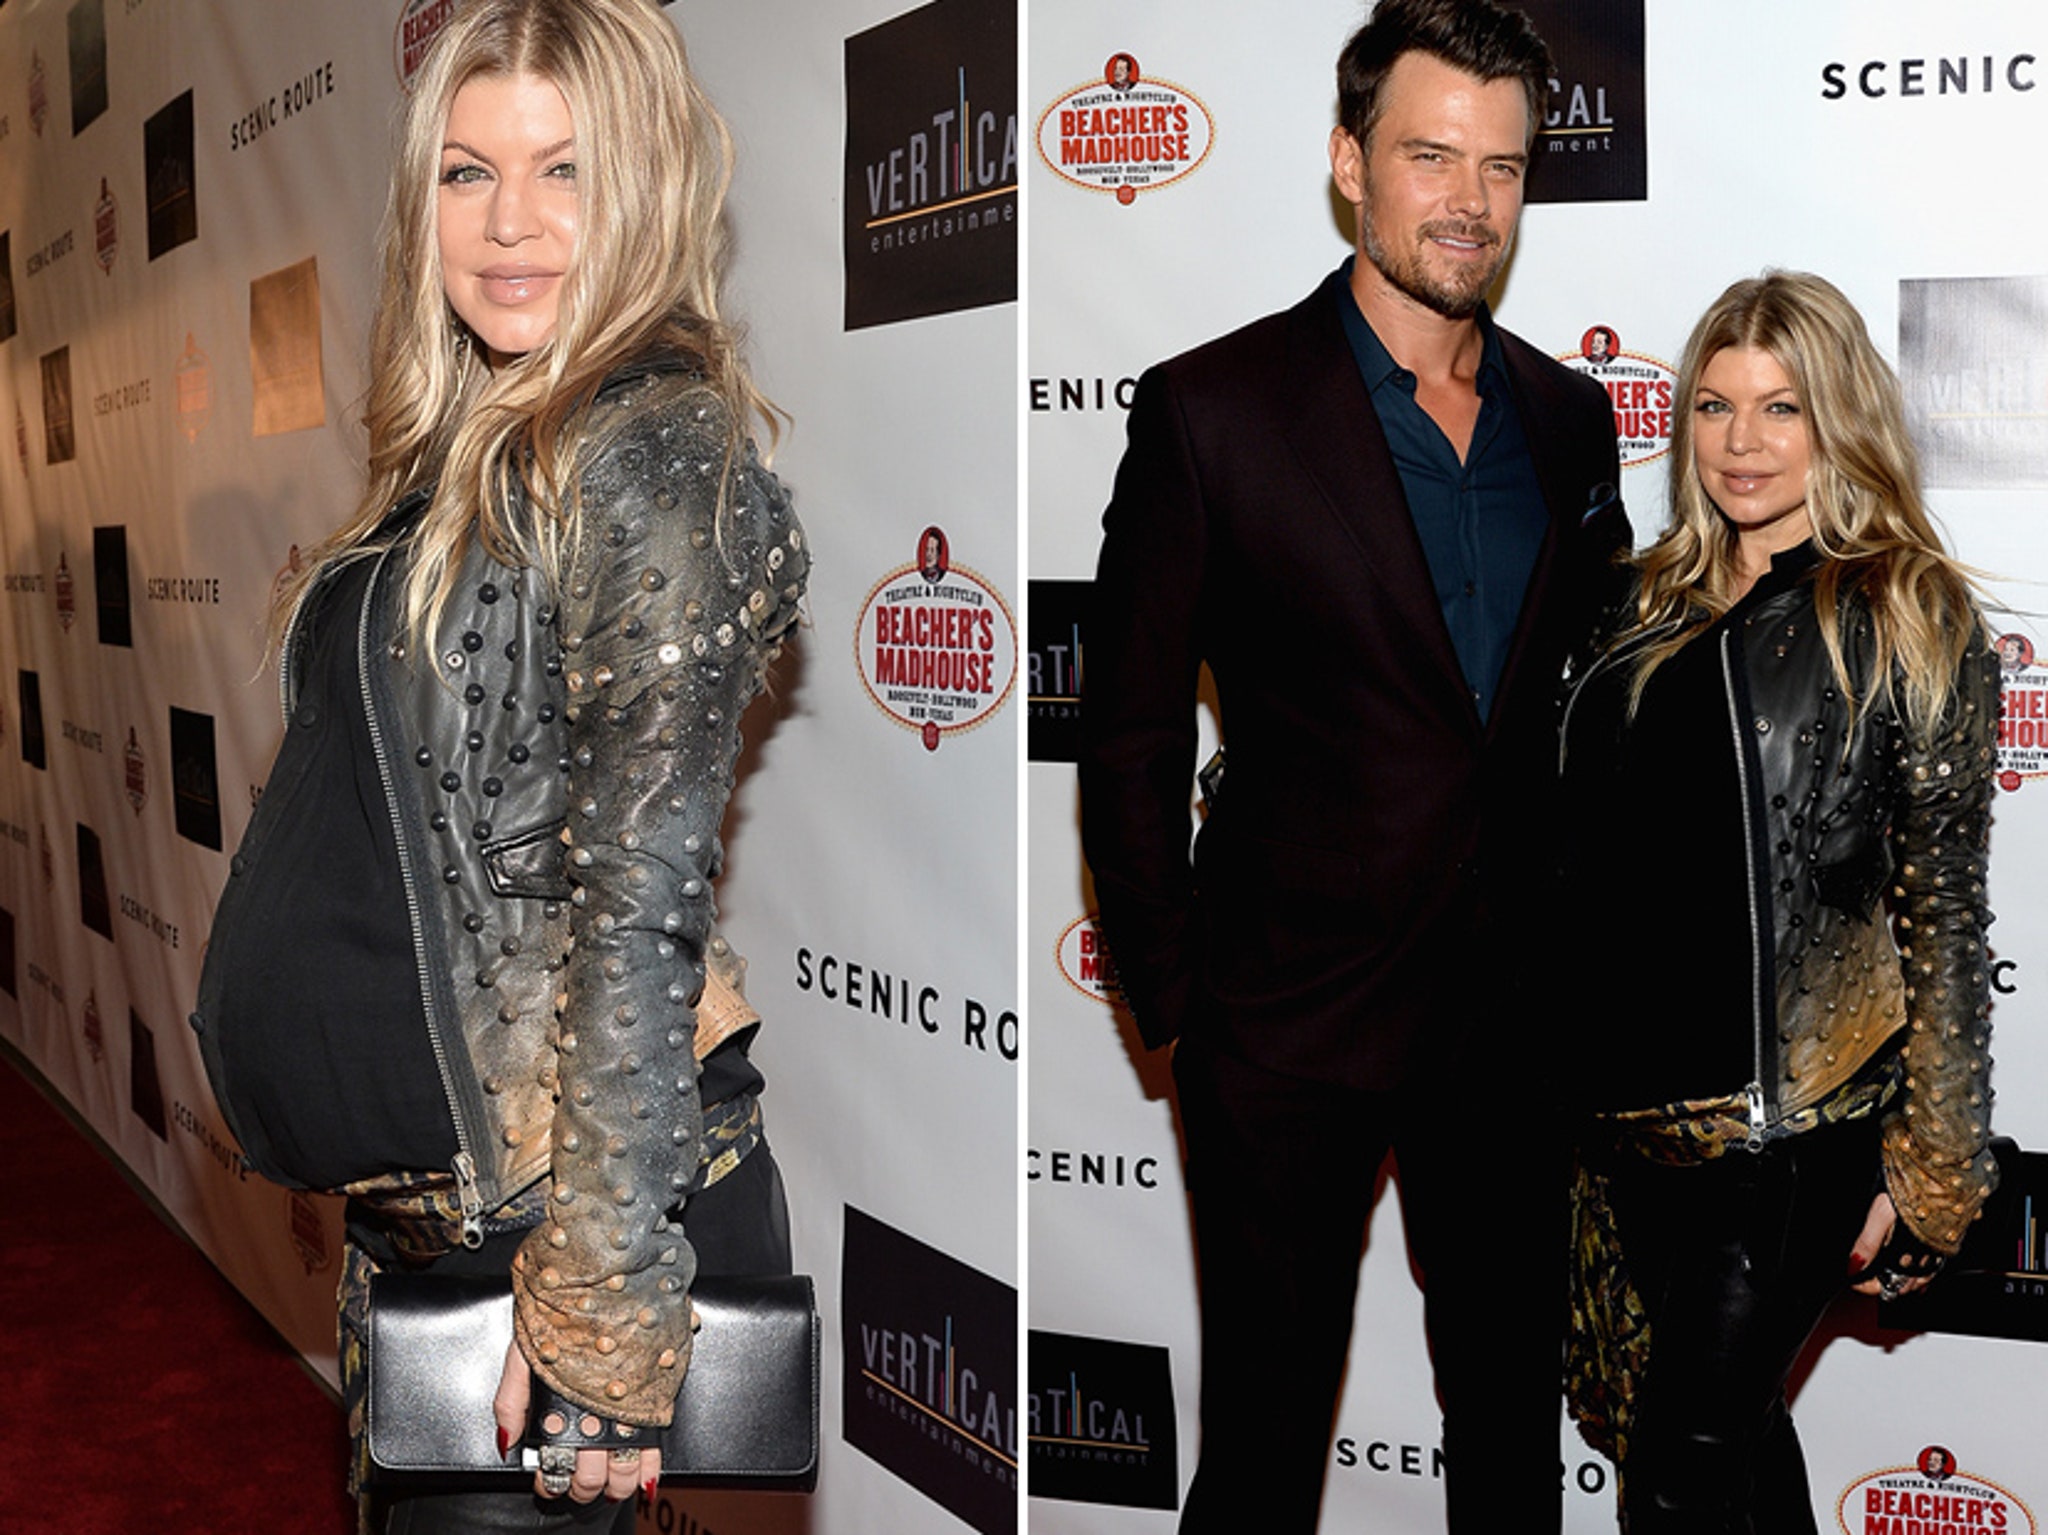 Fergie and Josh Duhamel welcome their baby Axl Jack